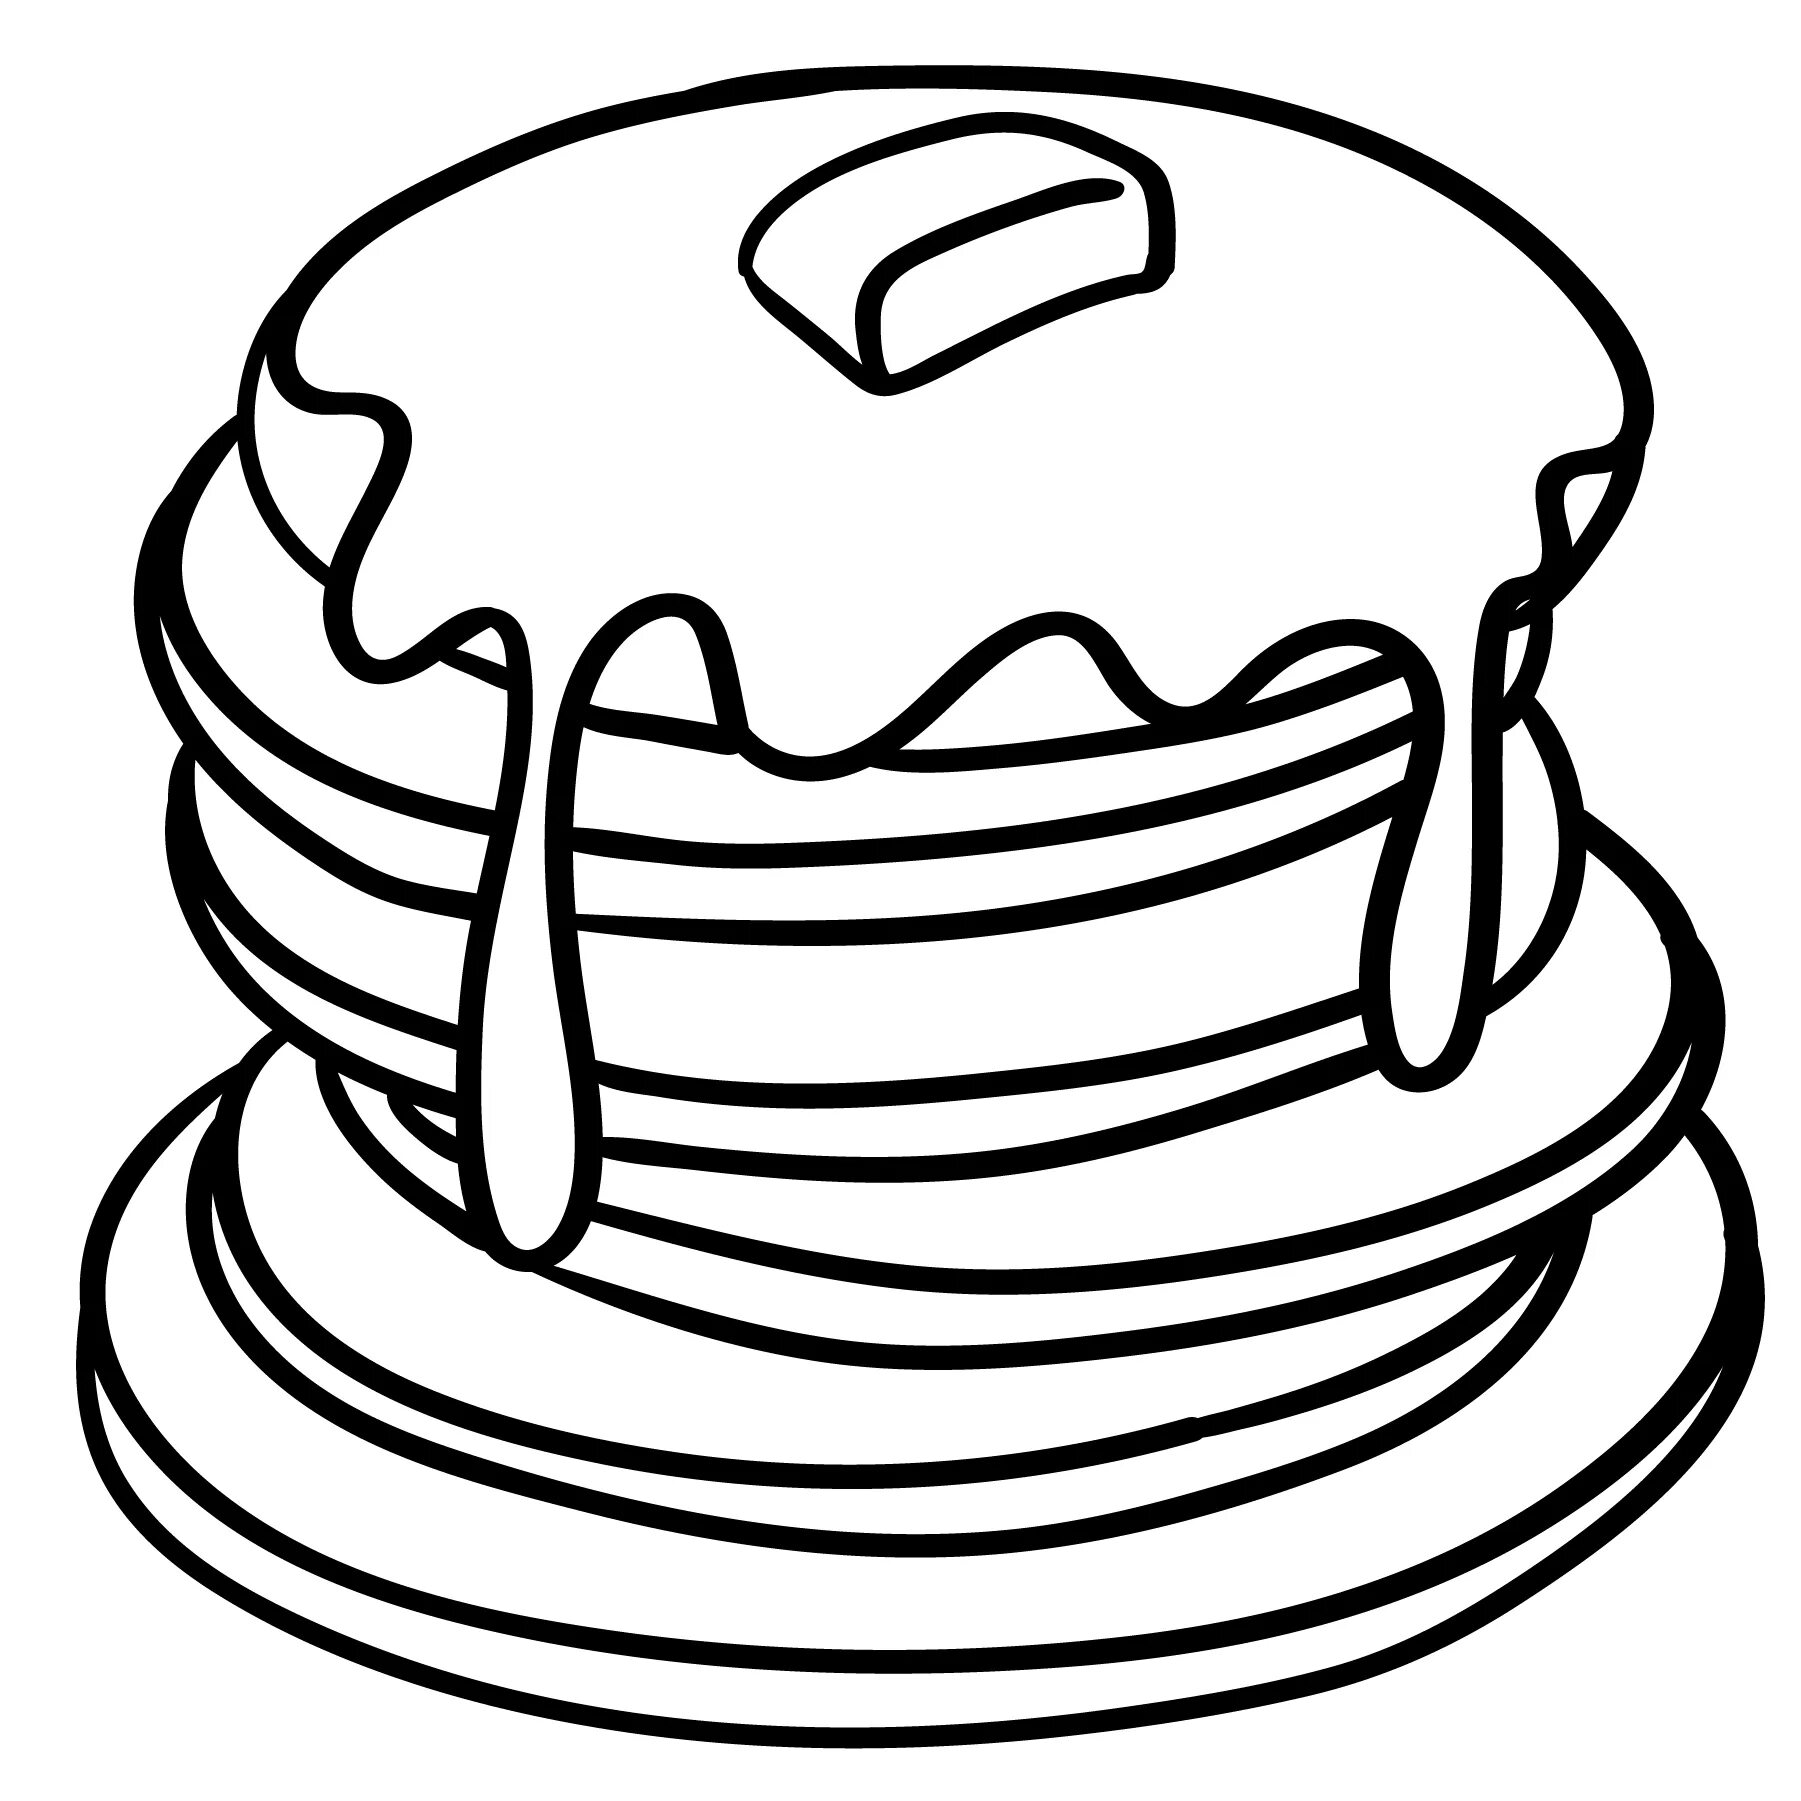 Coloring pancakes for kids